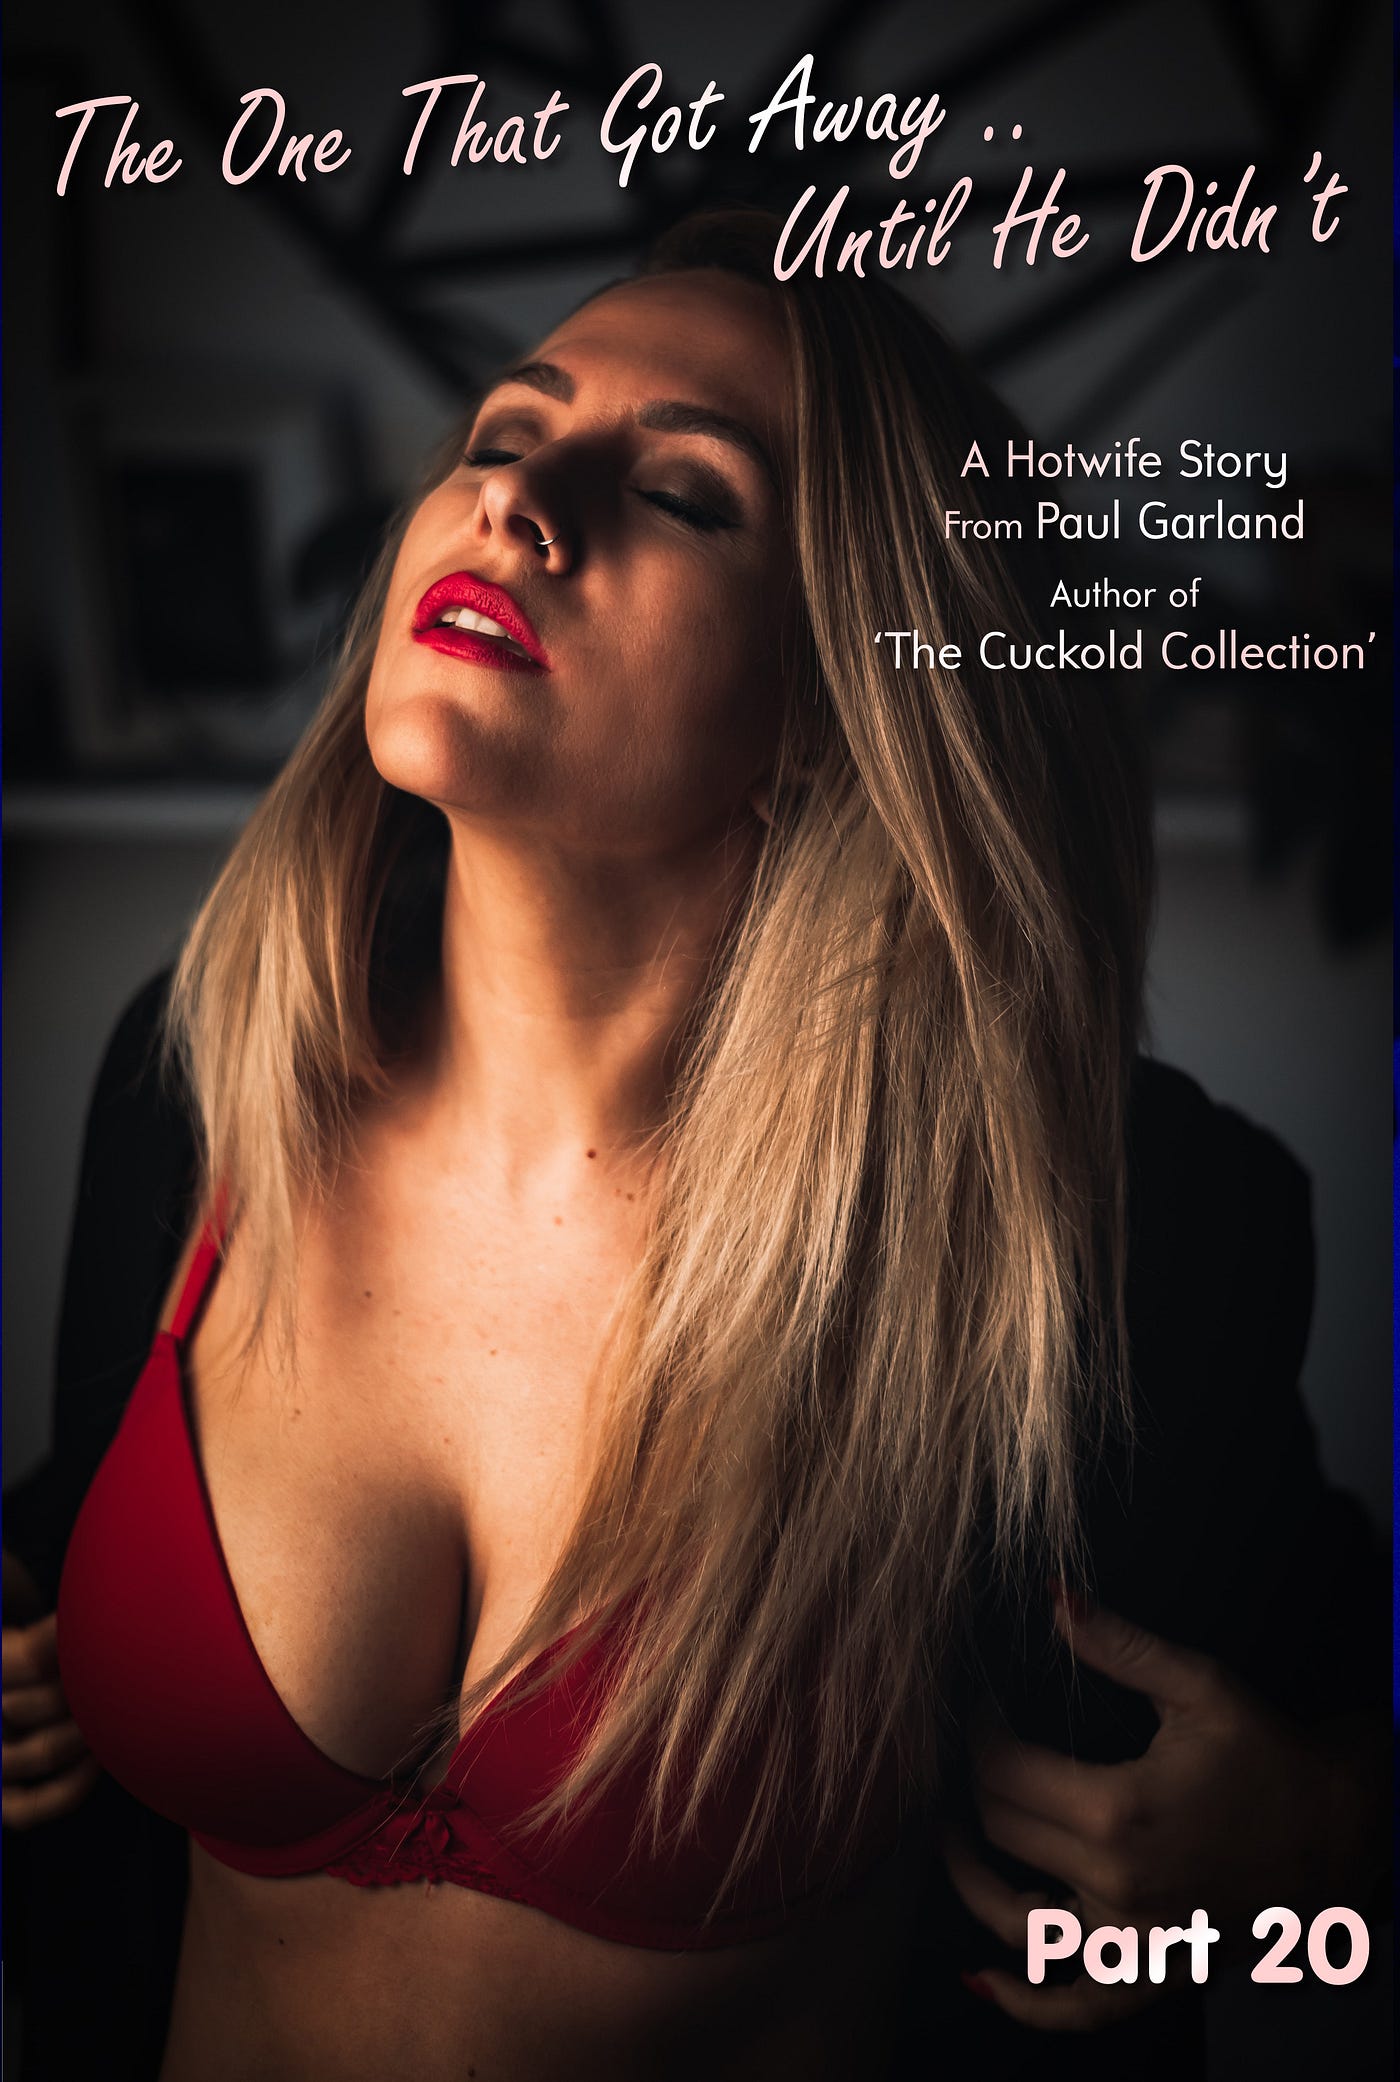 The One That Got Away… Until He Didnt Part 20 by Paul Garland ACHE (Authors of Cuckold and Hotwife Erotica) Medium